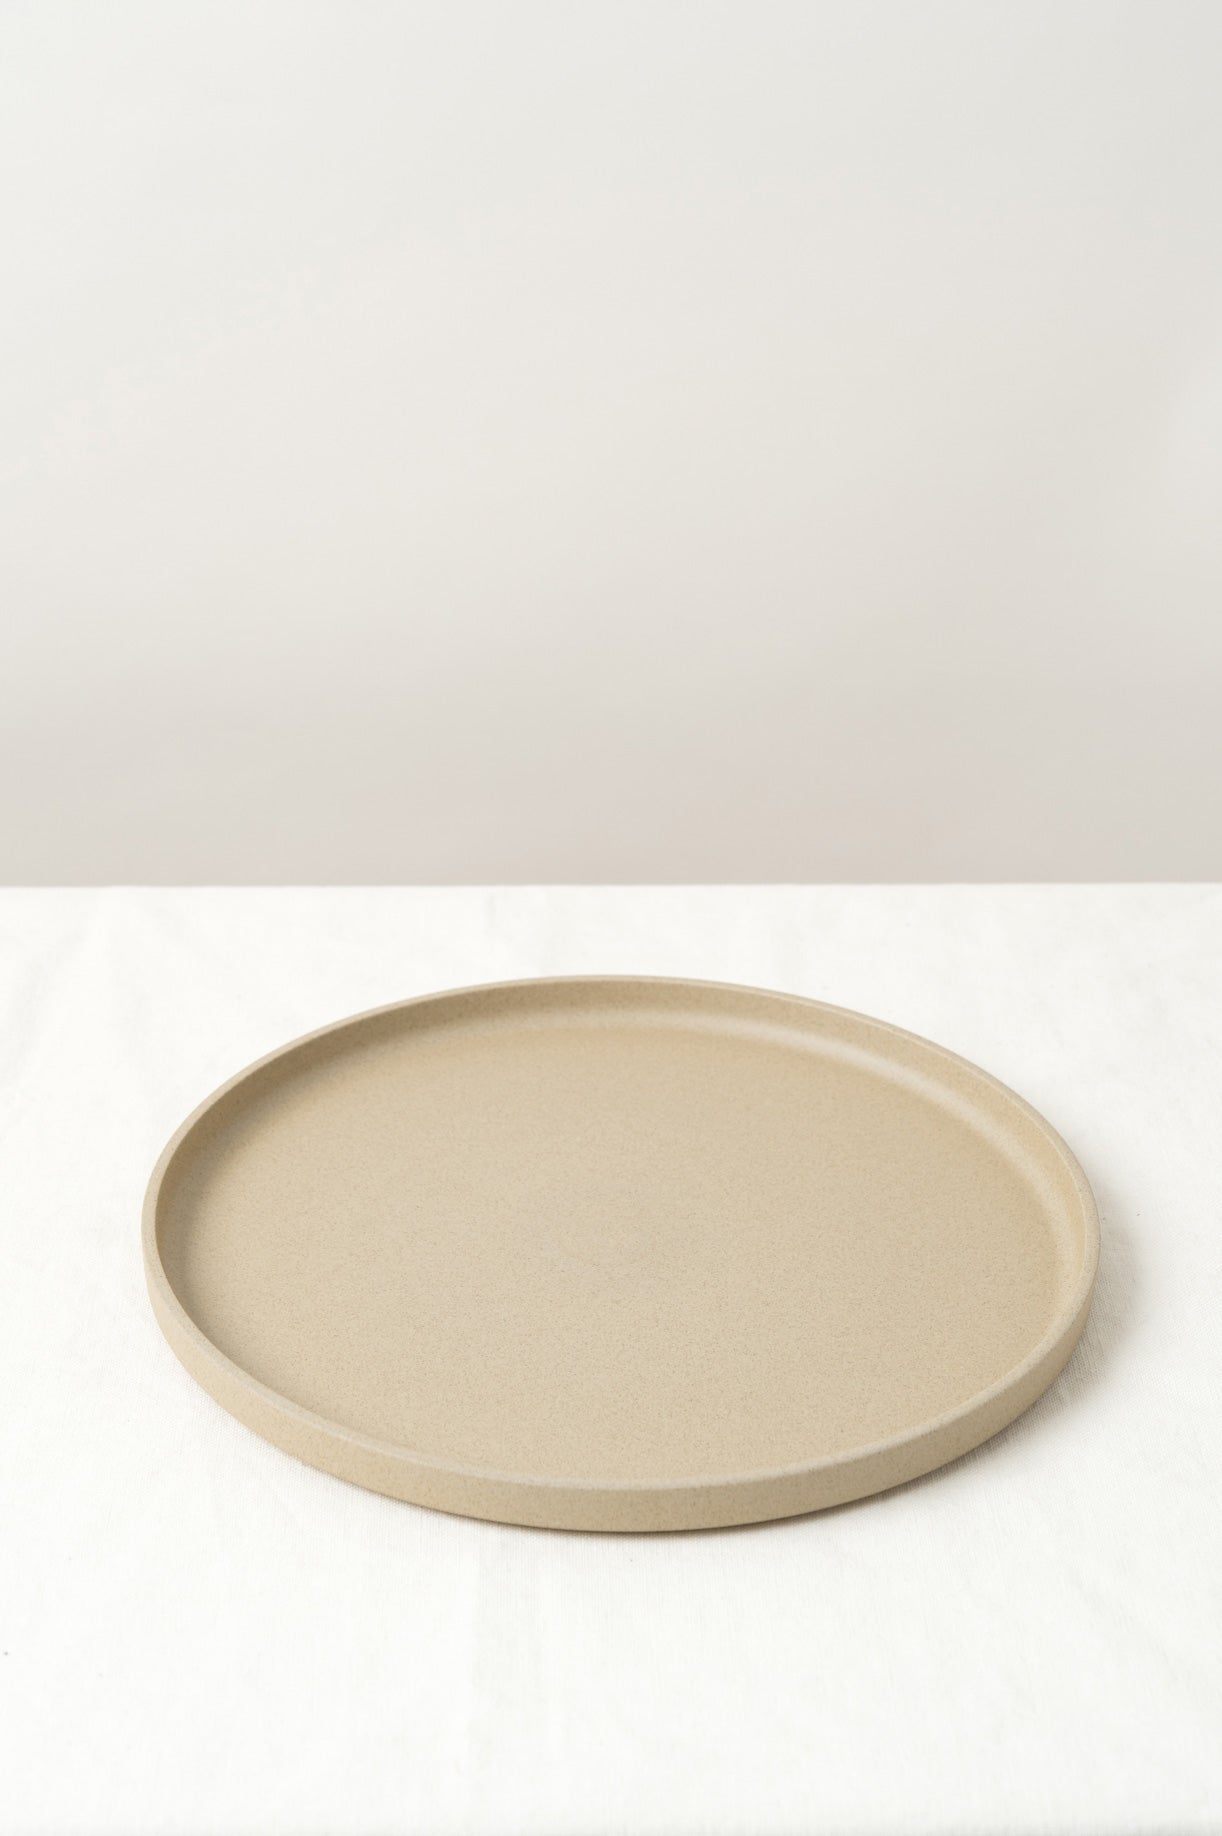 11" Plate on table